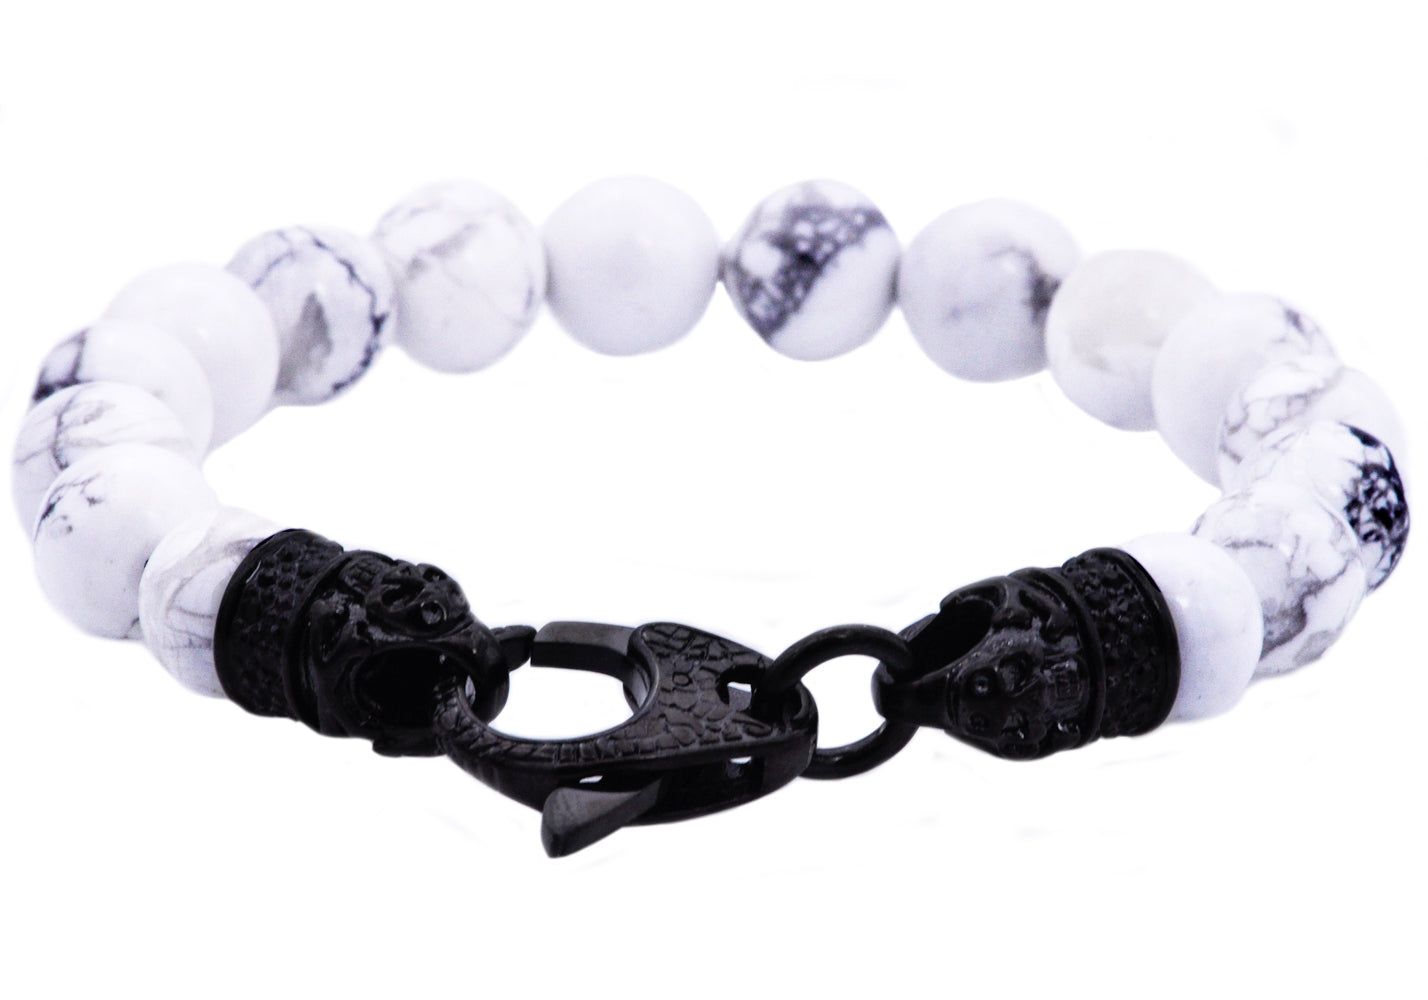 Buy REBUY Black Obsidian Bracelet Natural Gem Stone Beaded Bracelet With  Silver Buddha Head Crystal Stone Beads Size 8 MM at Amazon.in